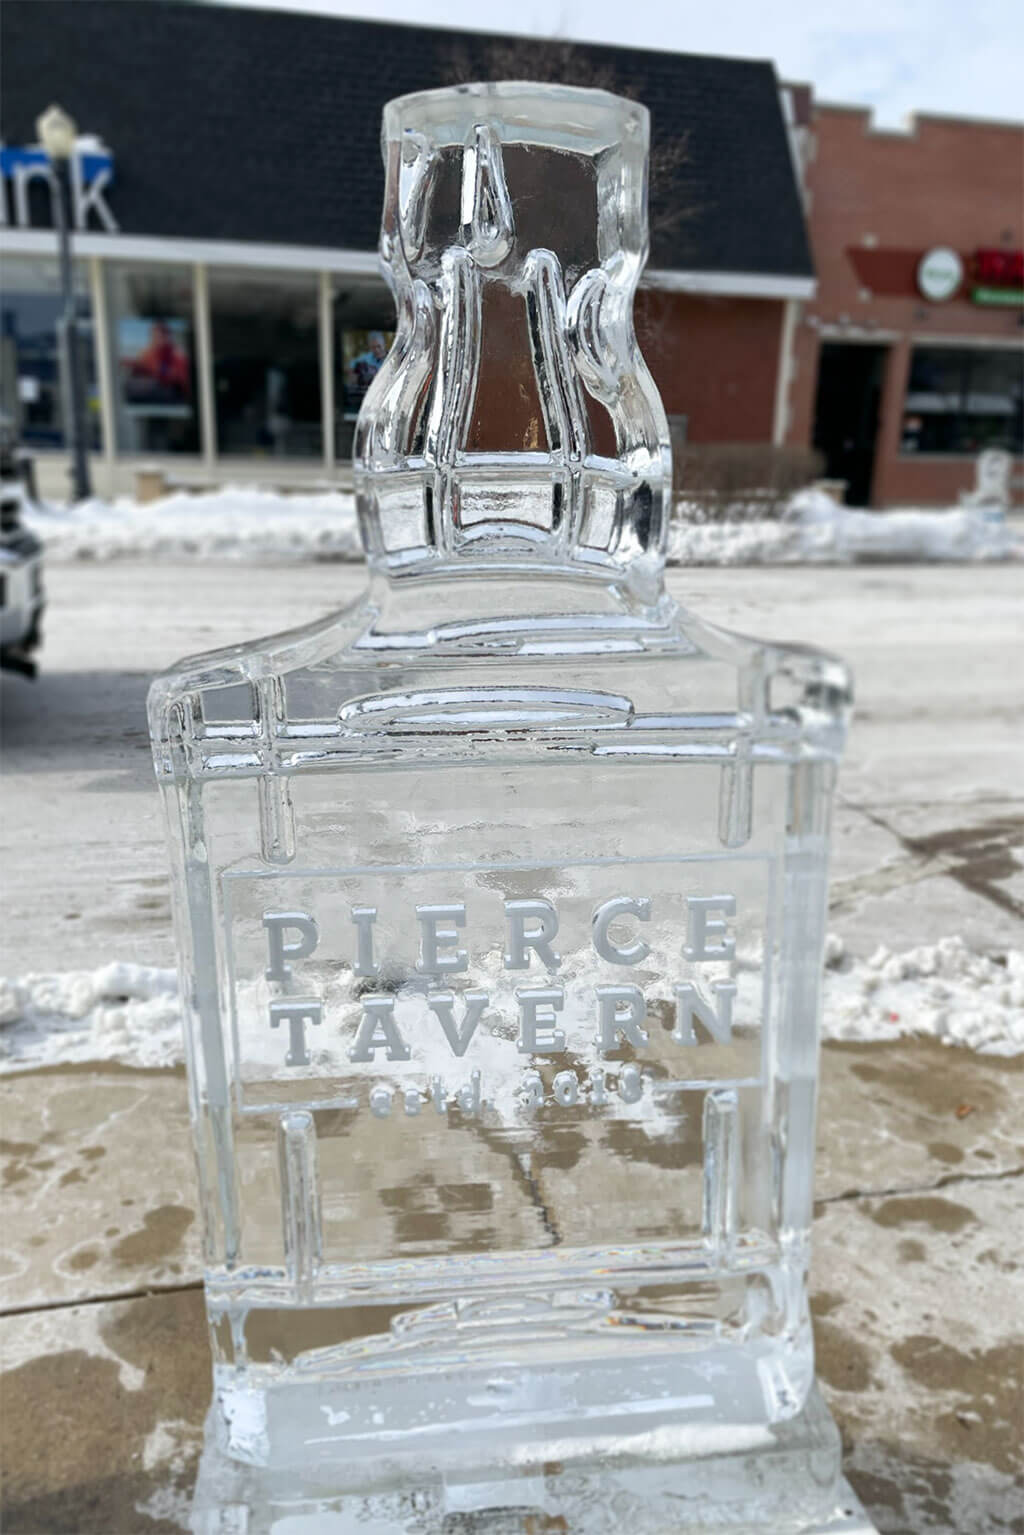 drive-swim-fly-downers-grove-chicago-illinois-ice-sculpture-downtown-businesses-pierce-tavern-whiskey-bottle